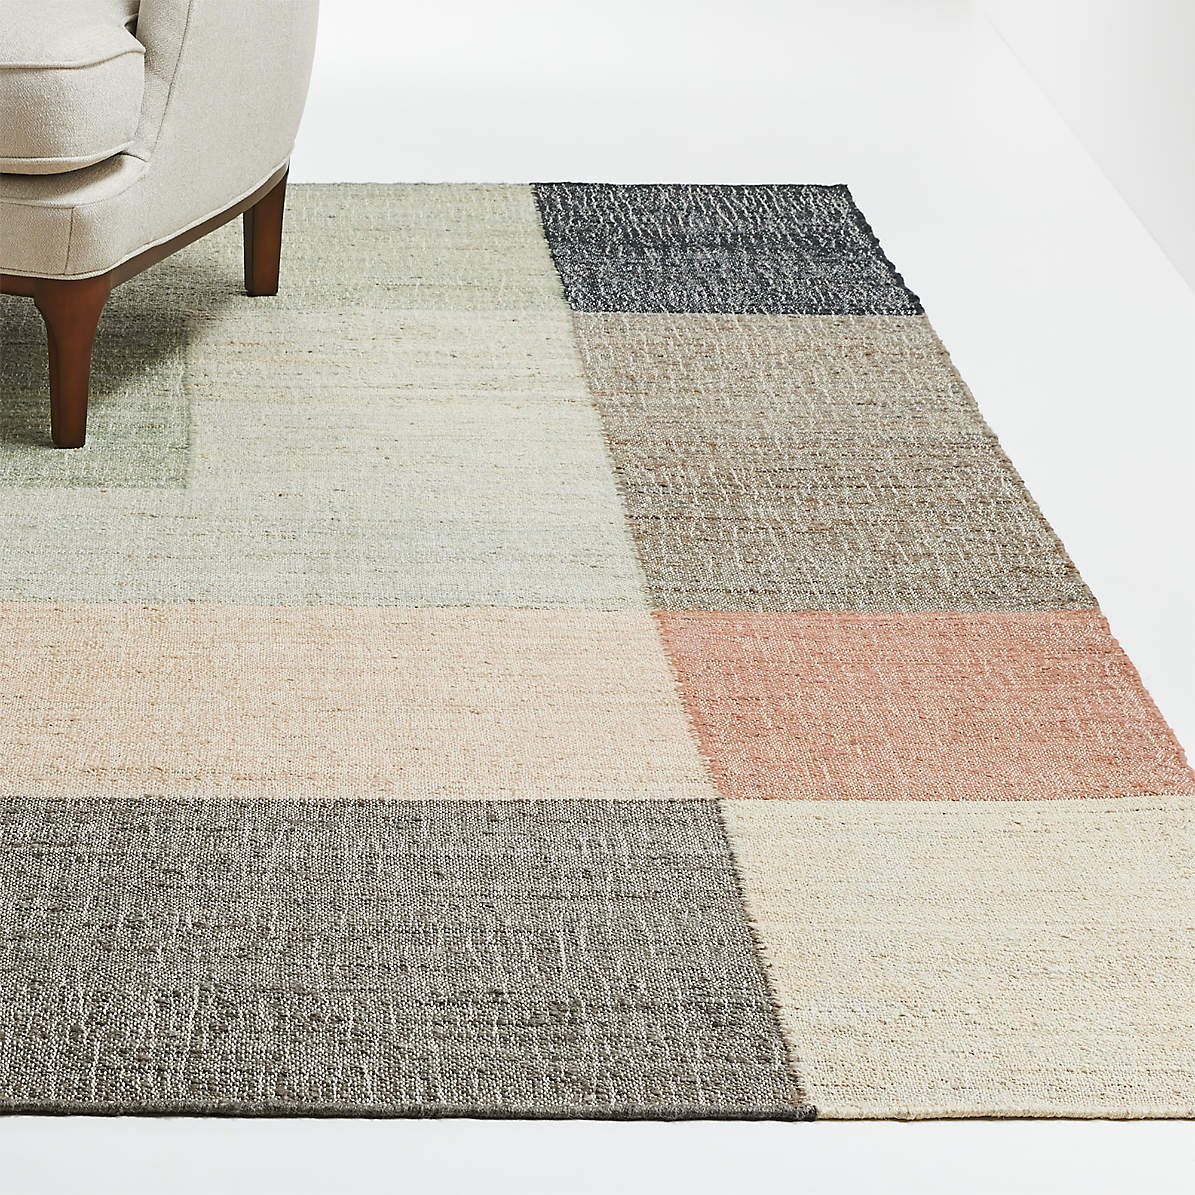 Enzi Rug 6 X9 Reviews Crate And Barrel, Crate And Barrel Rugs